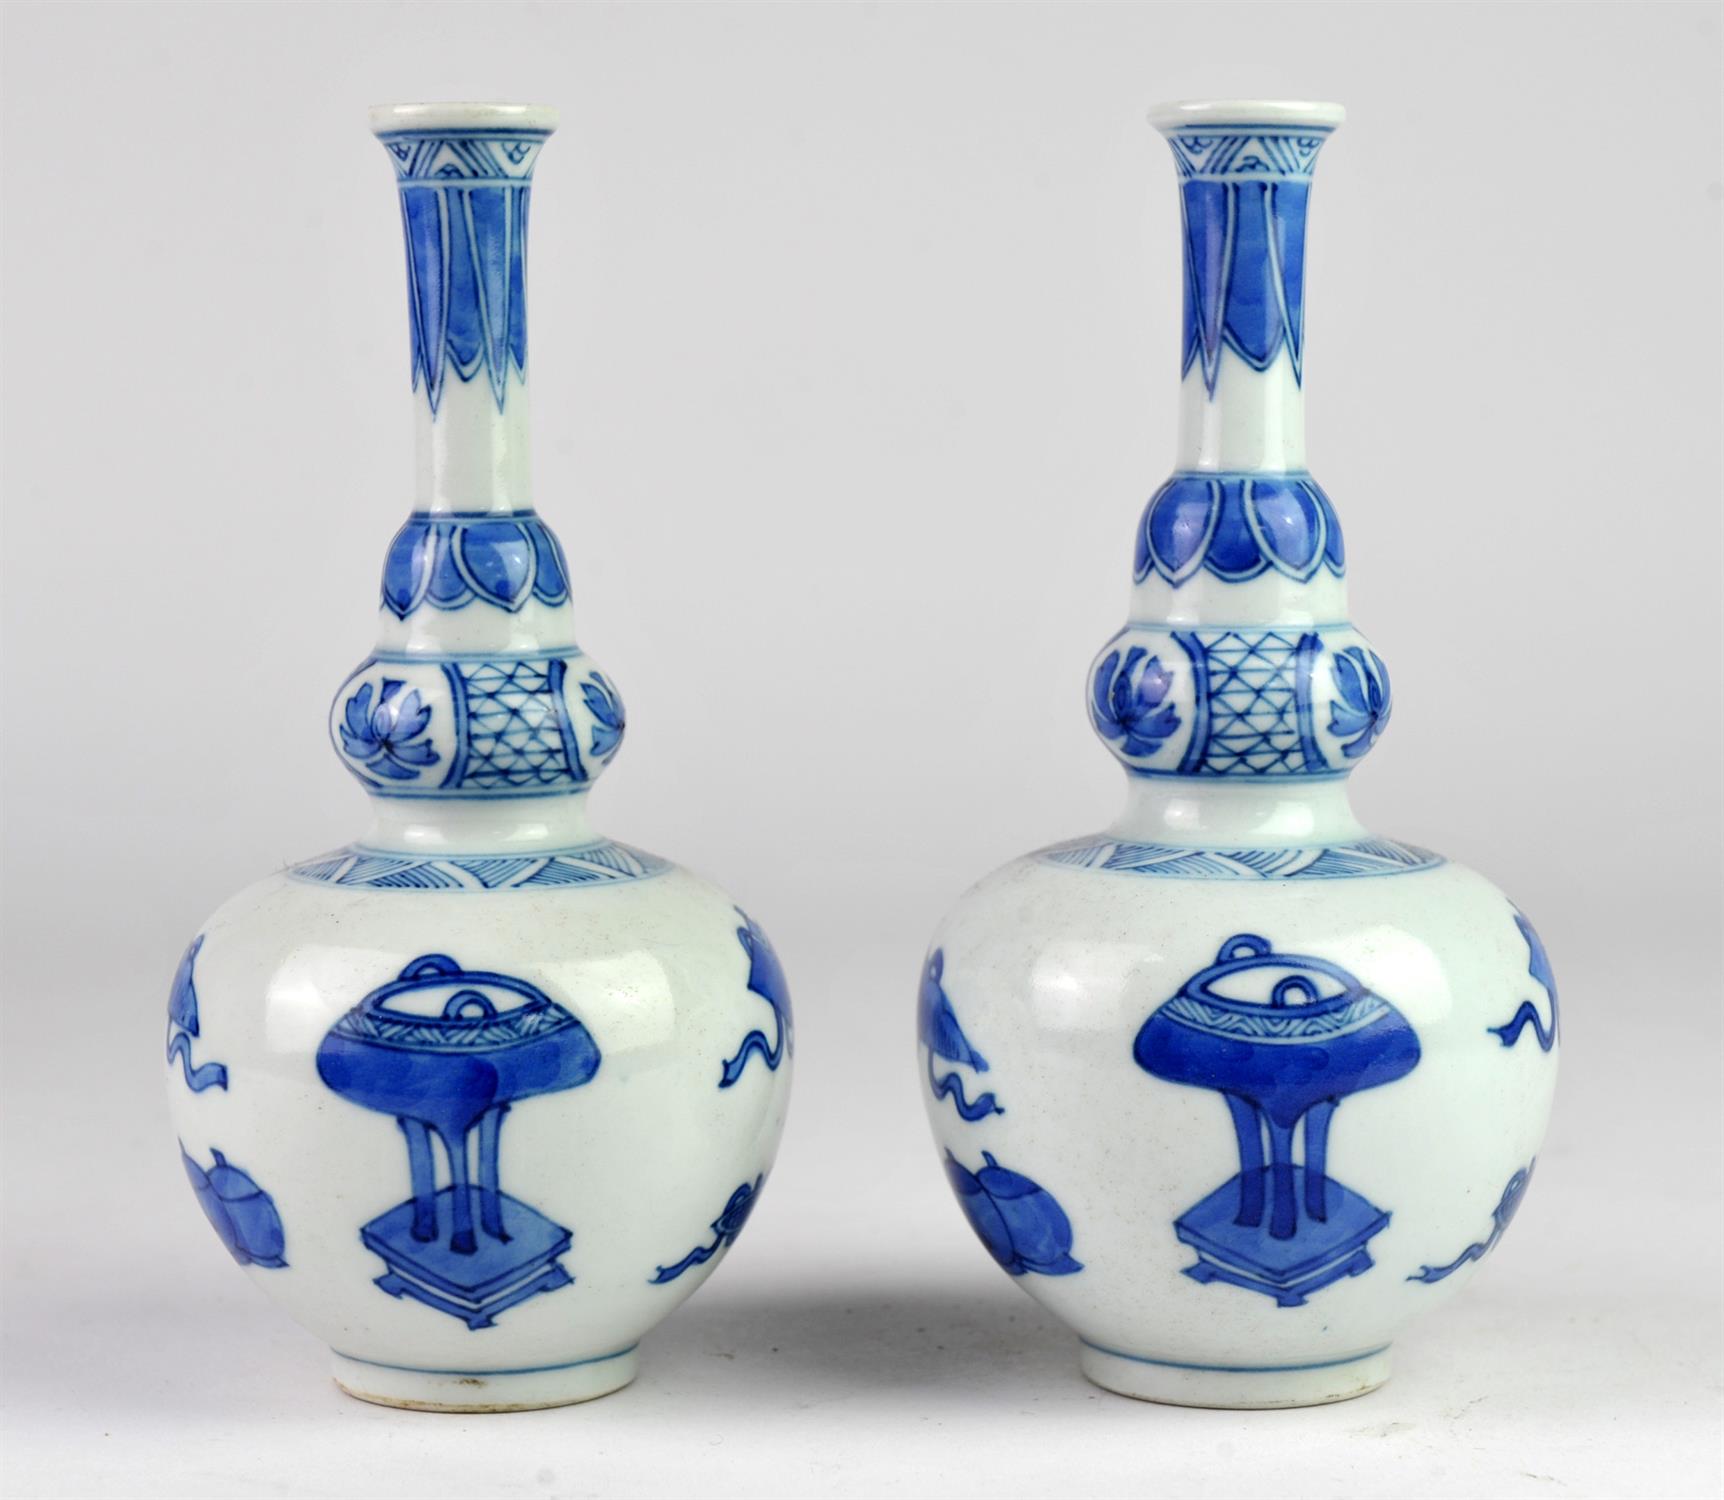 Pair of Chinese blue and white vases, 20th Century, decorated with censers and precious objects, - Image 3 of 4